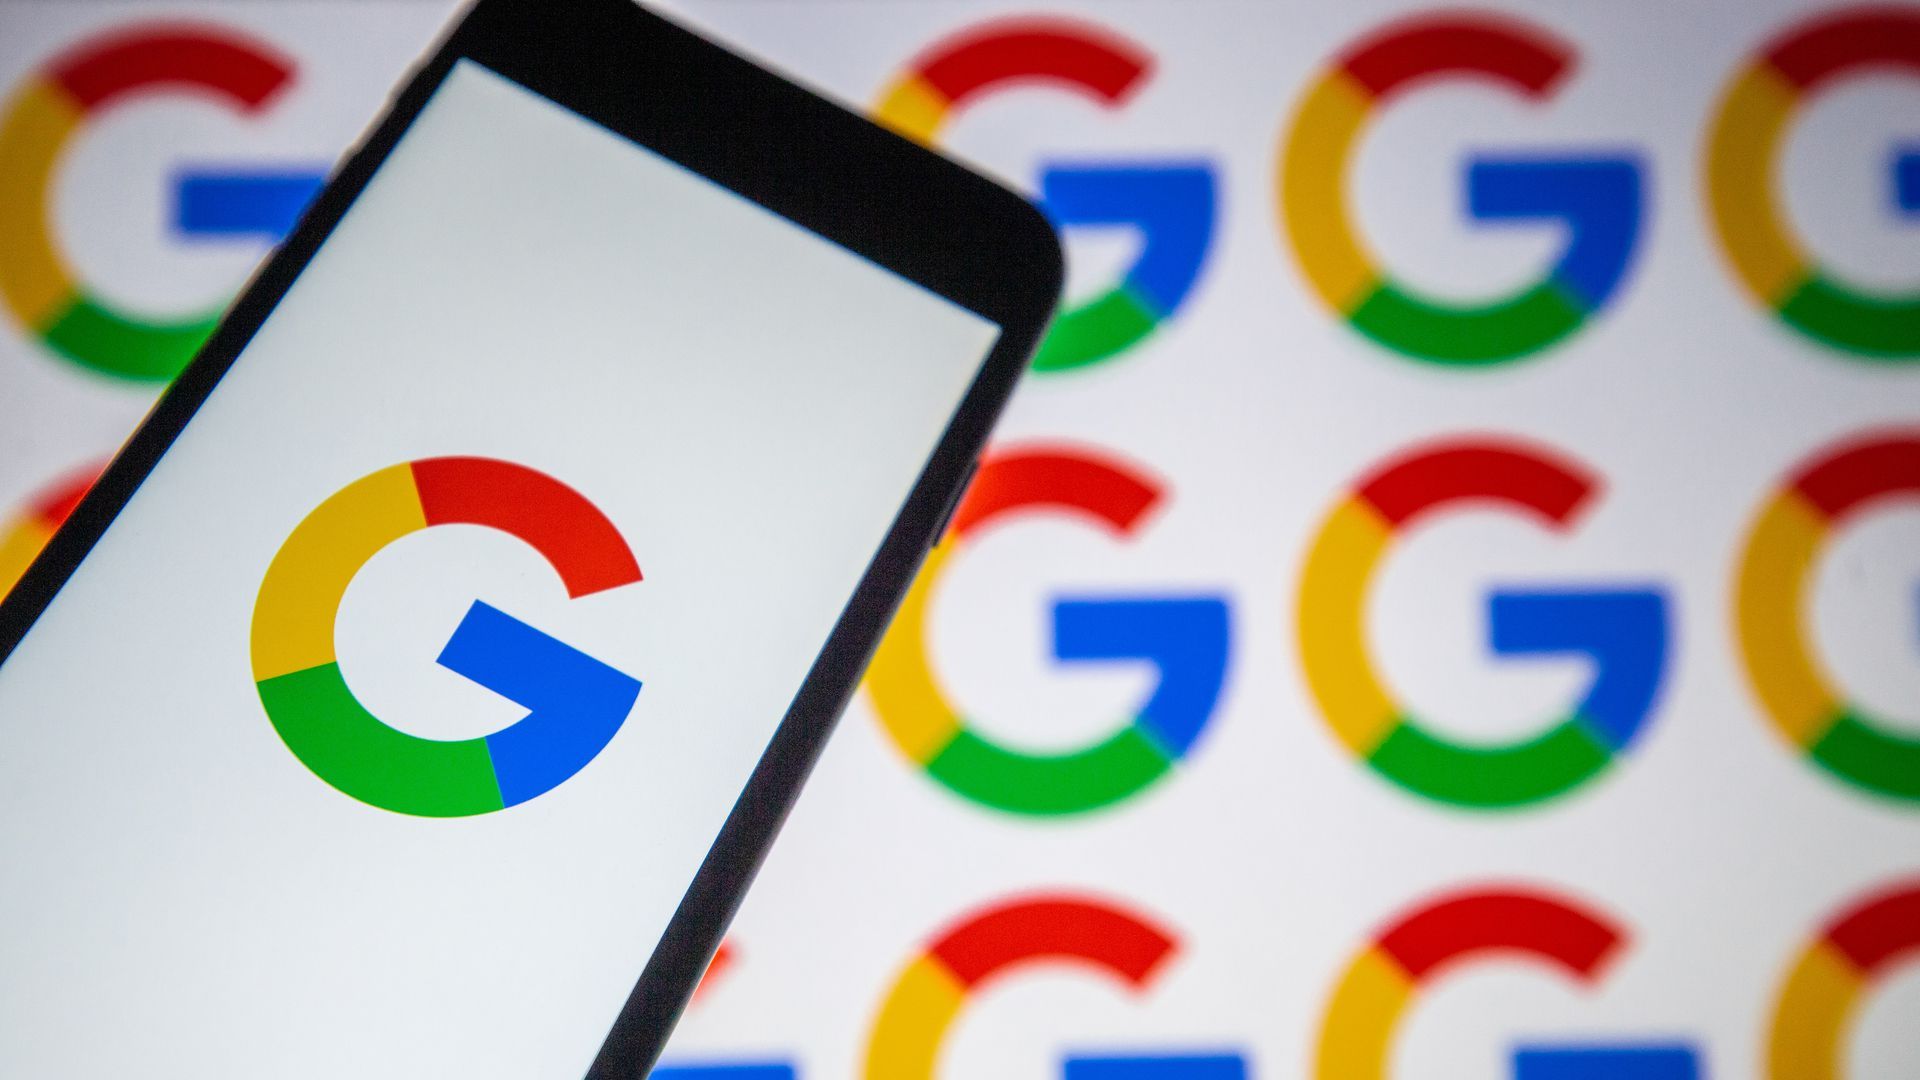 A photo of a smartphone with a Google logo against a background of Google logos